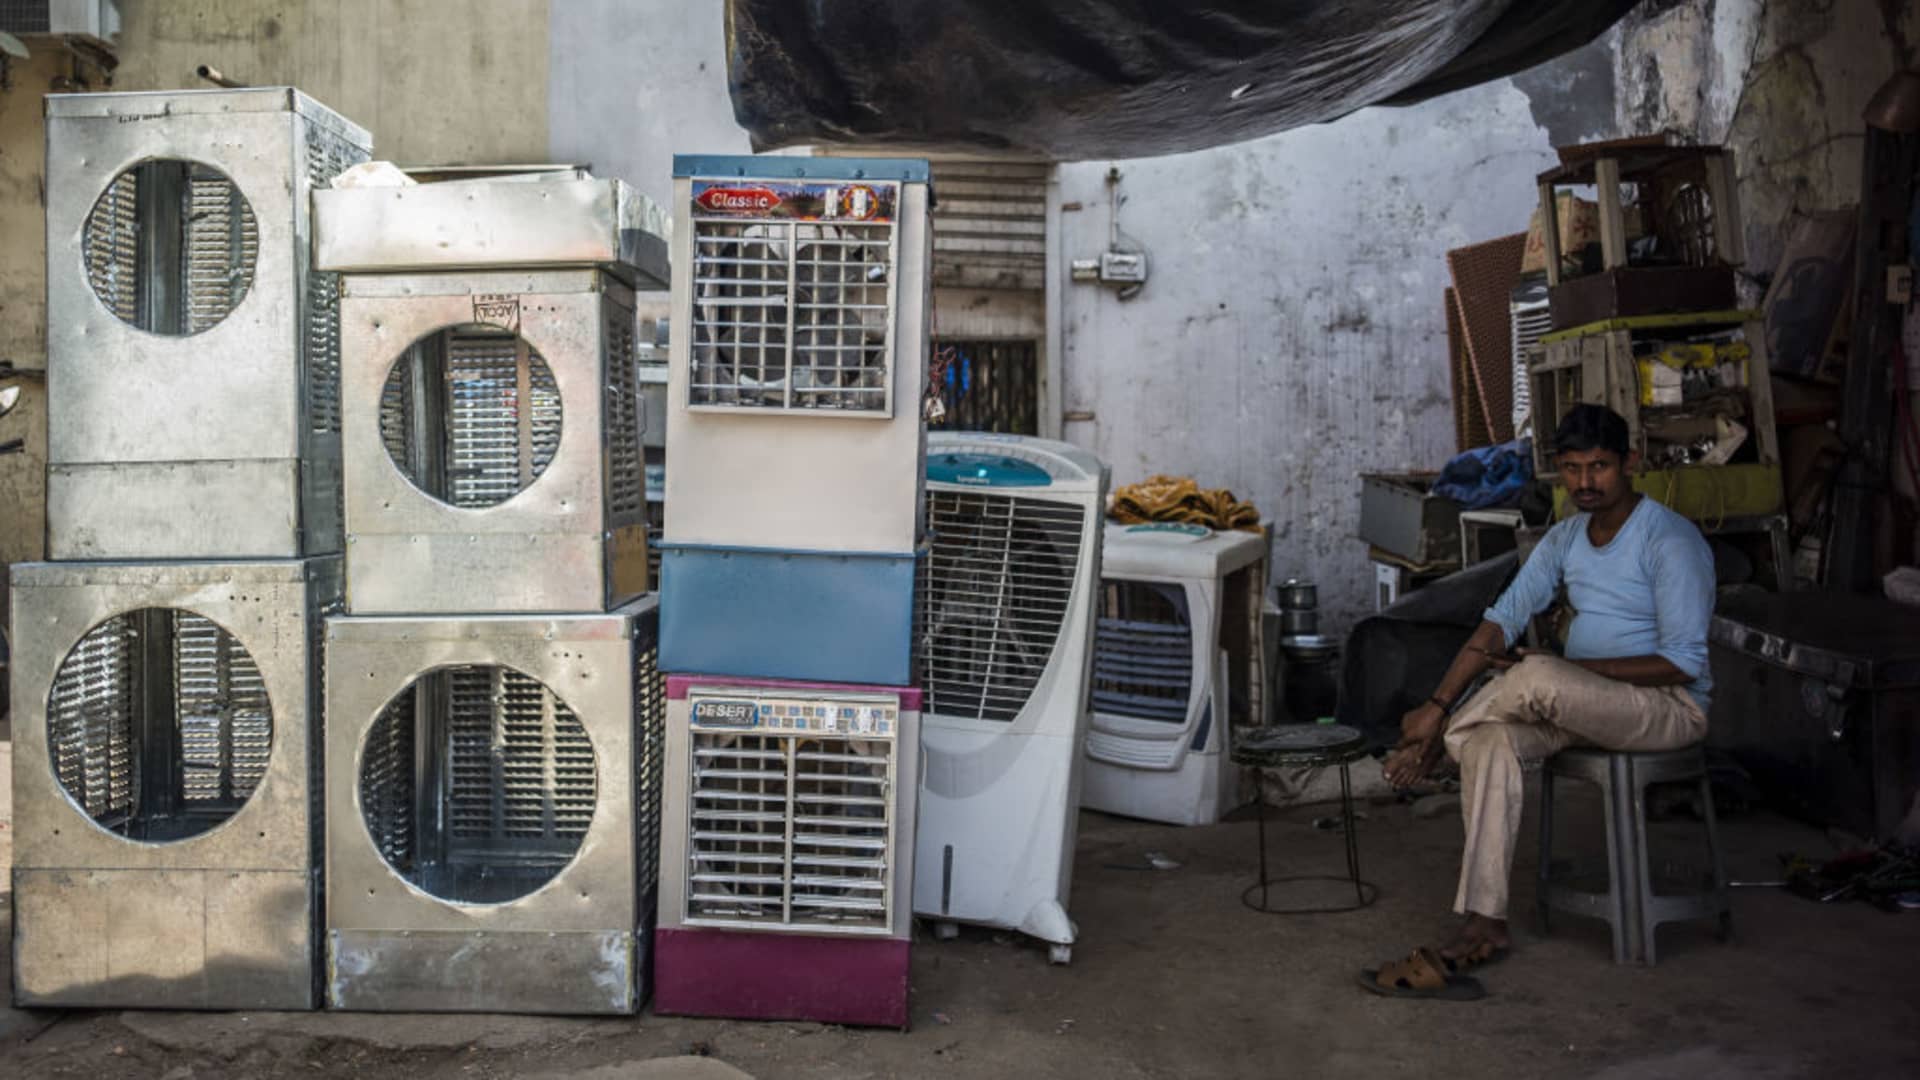 Air-coolers for sale in New Delhi, India, on Saturday, April 30, 2022. India is experiencing a heat wave, with the countrys average temperature reaching almost 92 degrees Fahrenheit (33 degrees Celsius) in March, the highest on record for the month since authorities started collecting the data in 1901.